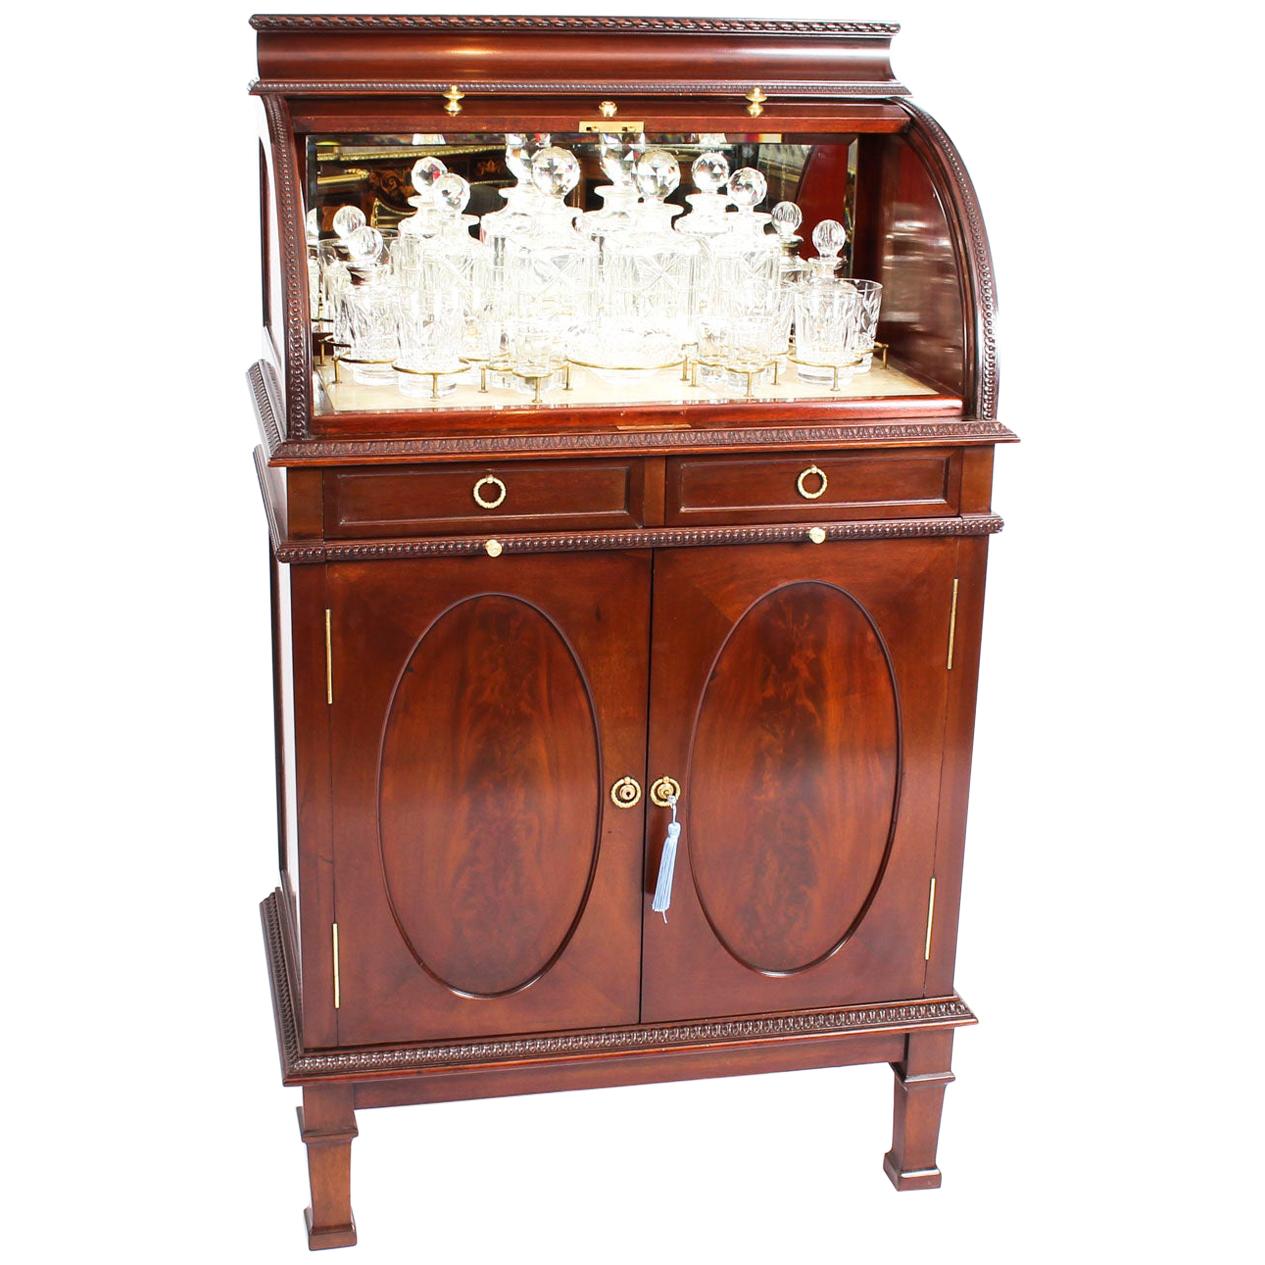 Antique Mahogany Drinks Cocktail Cabinet Dry Bar, 19th Century